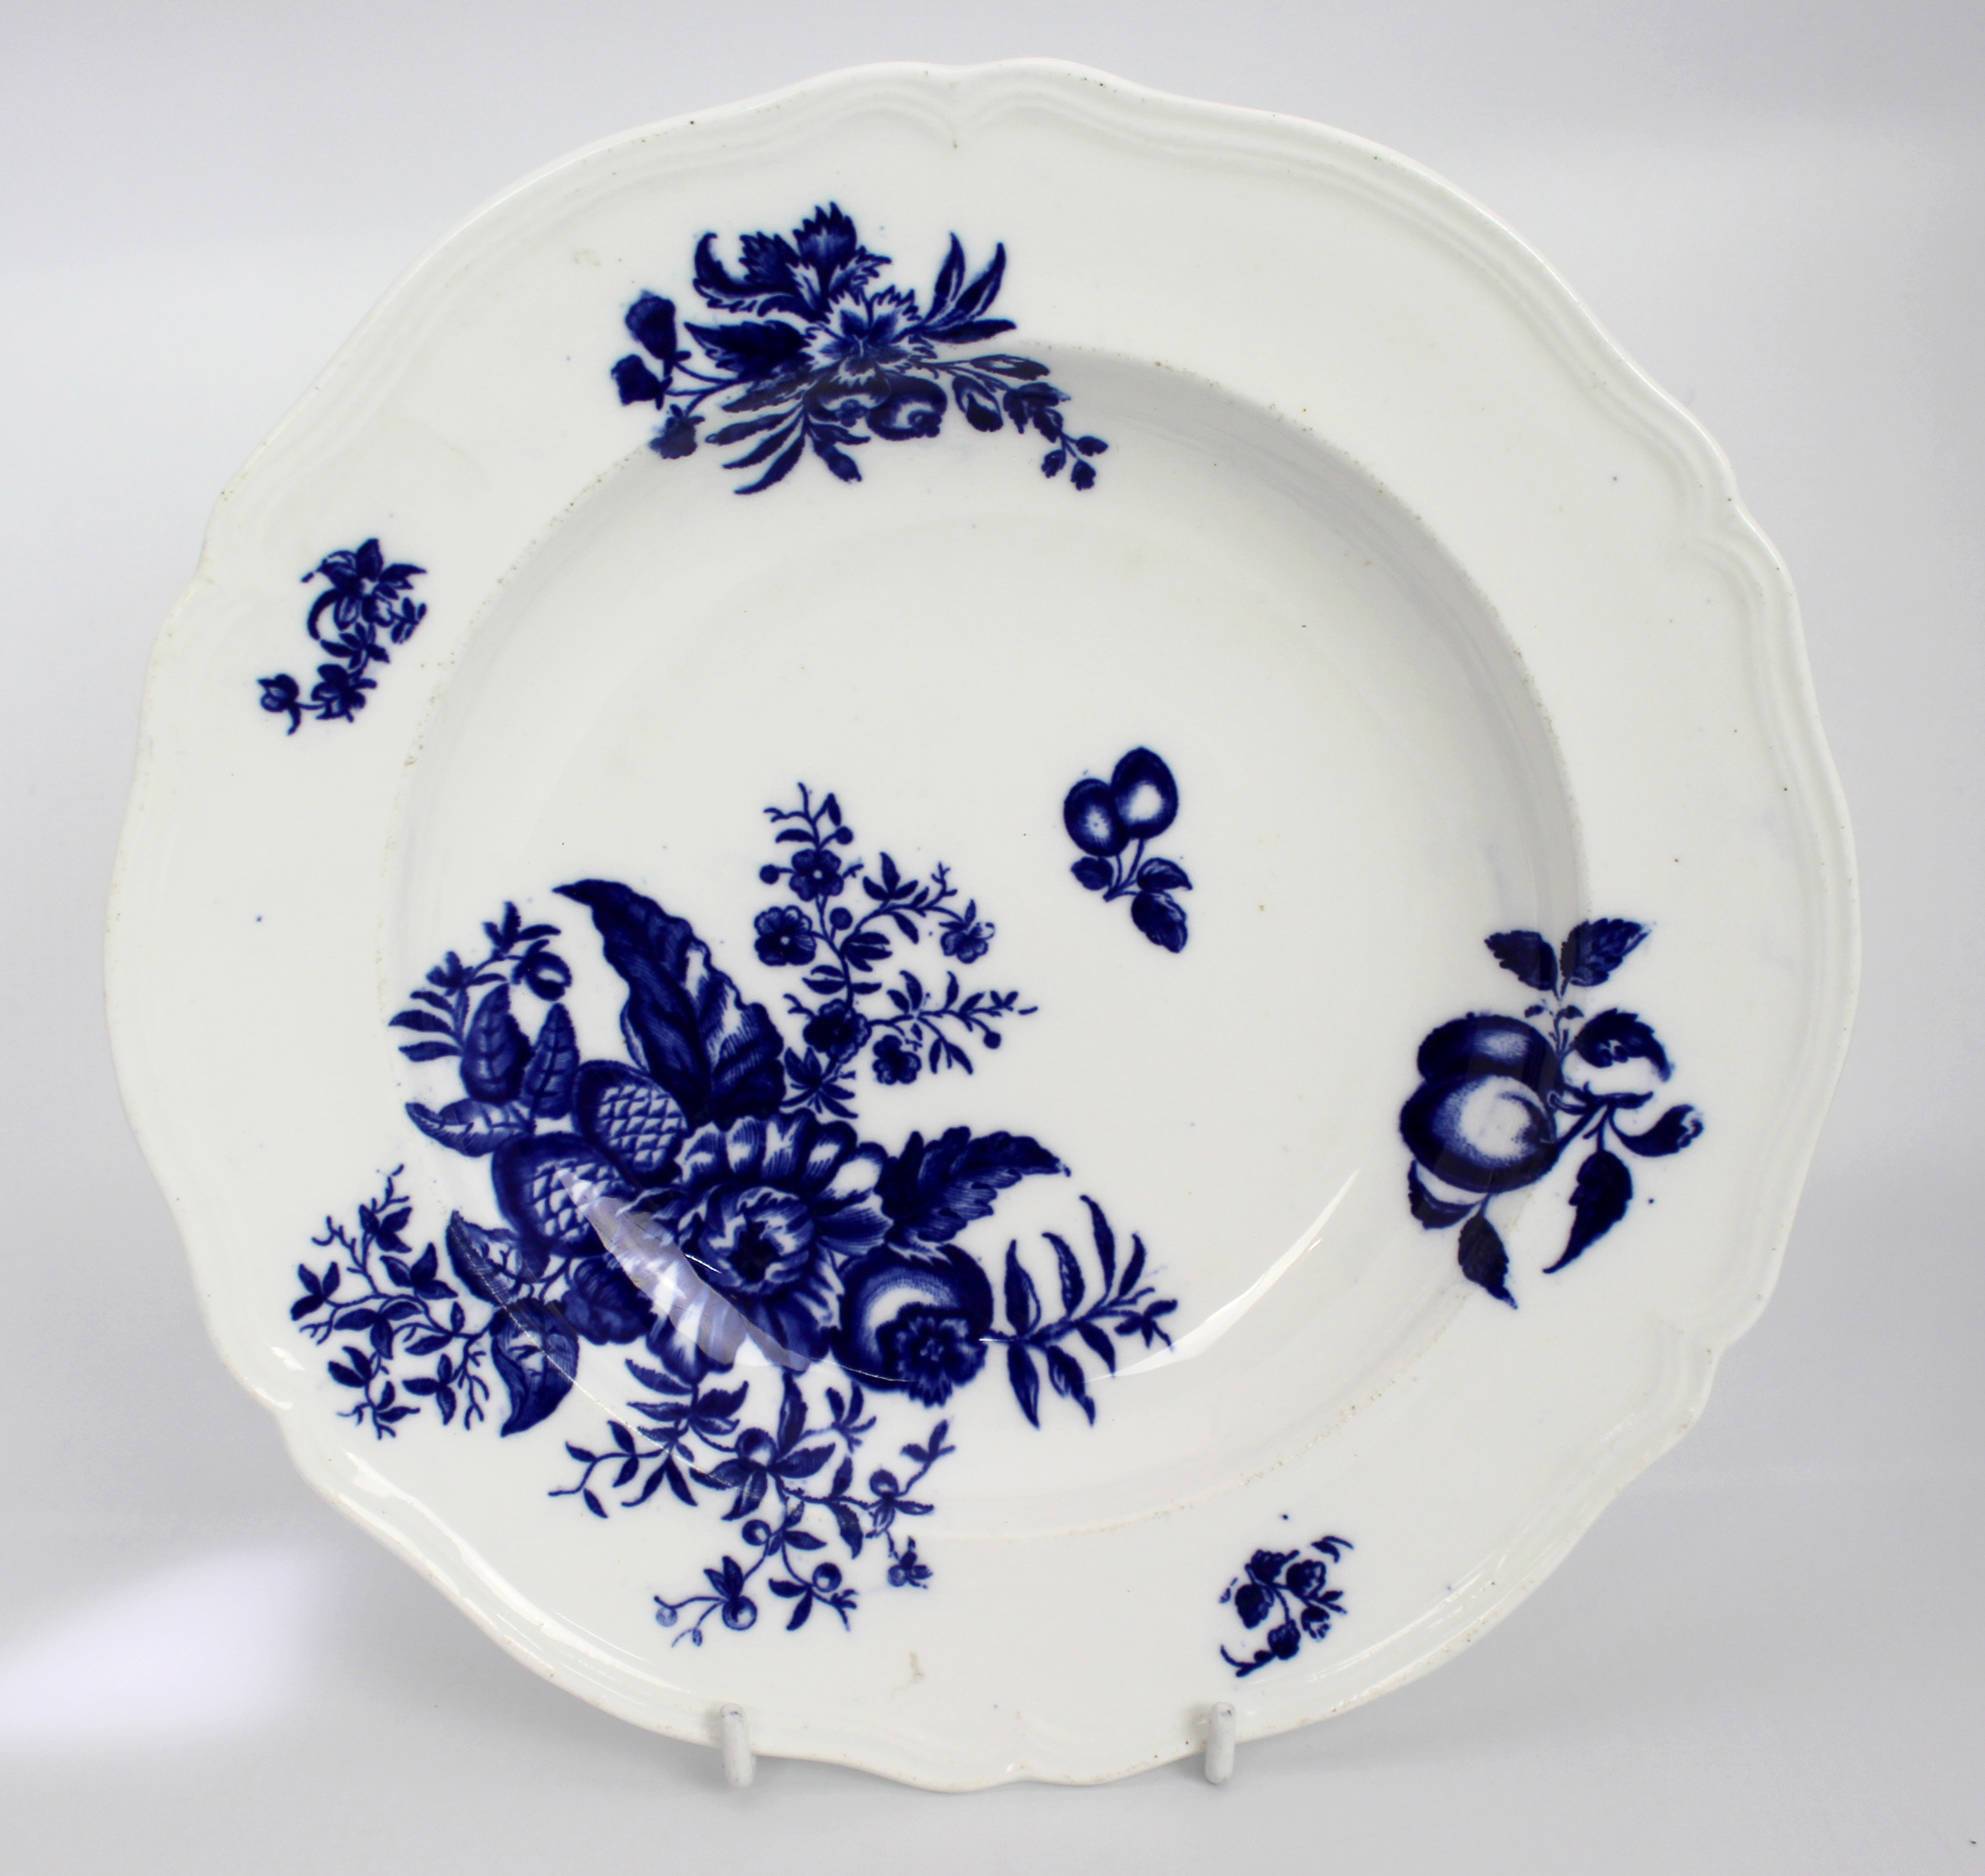 Pair of Late 18th c. Coalport Bowls - Image 3 of 5